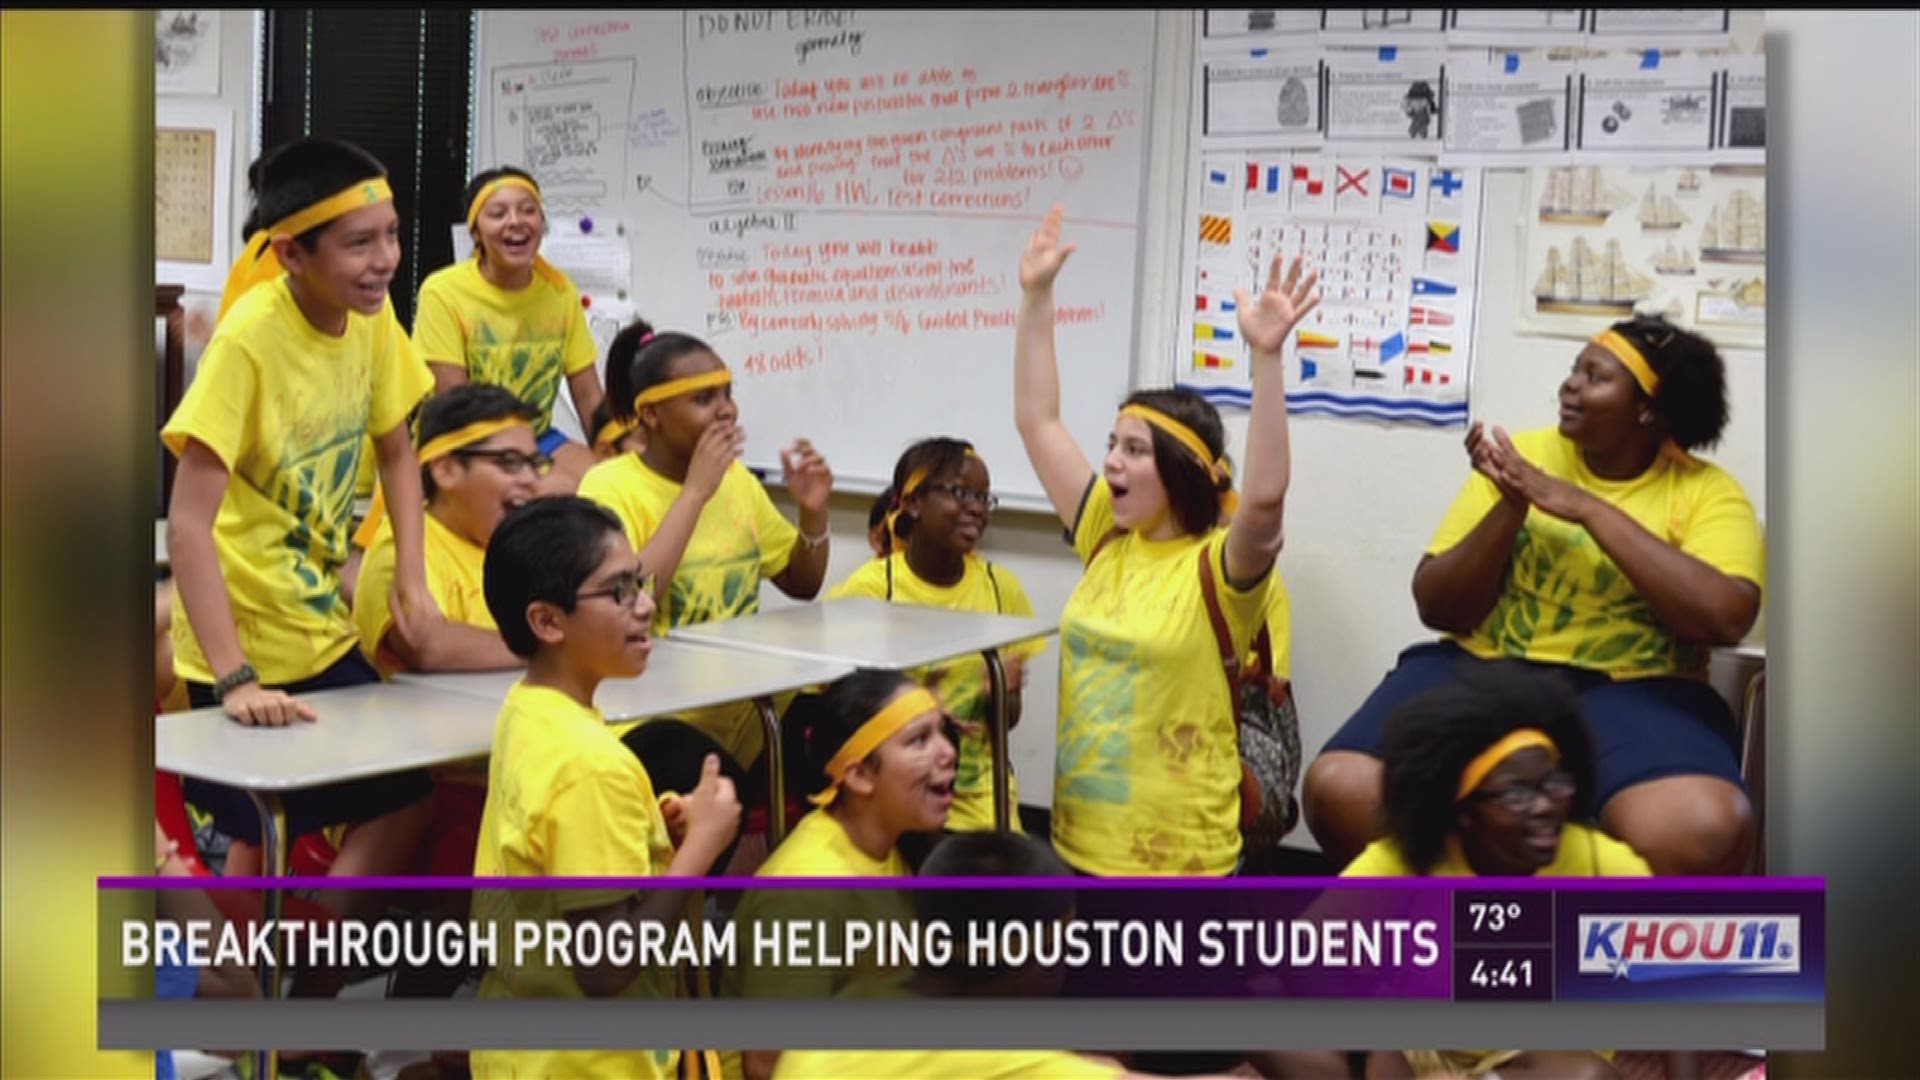 The Breakthrough program has been helping students for the last 20 years. The program guides students from seventh grade through high school by preparing them for college prep high schools and college. 